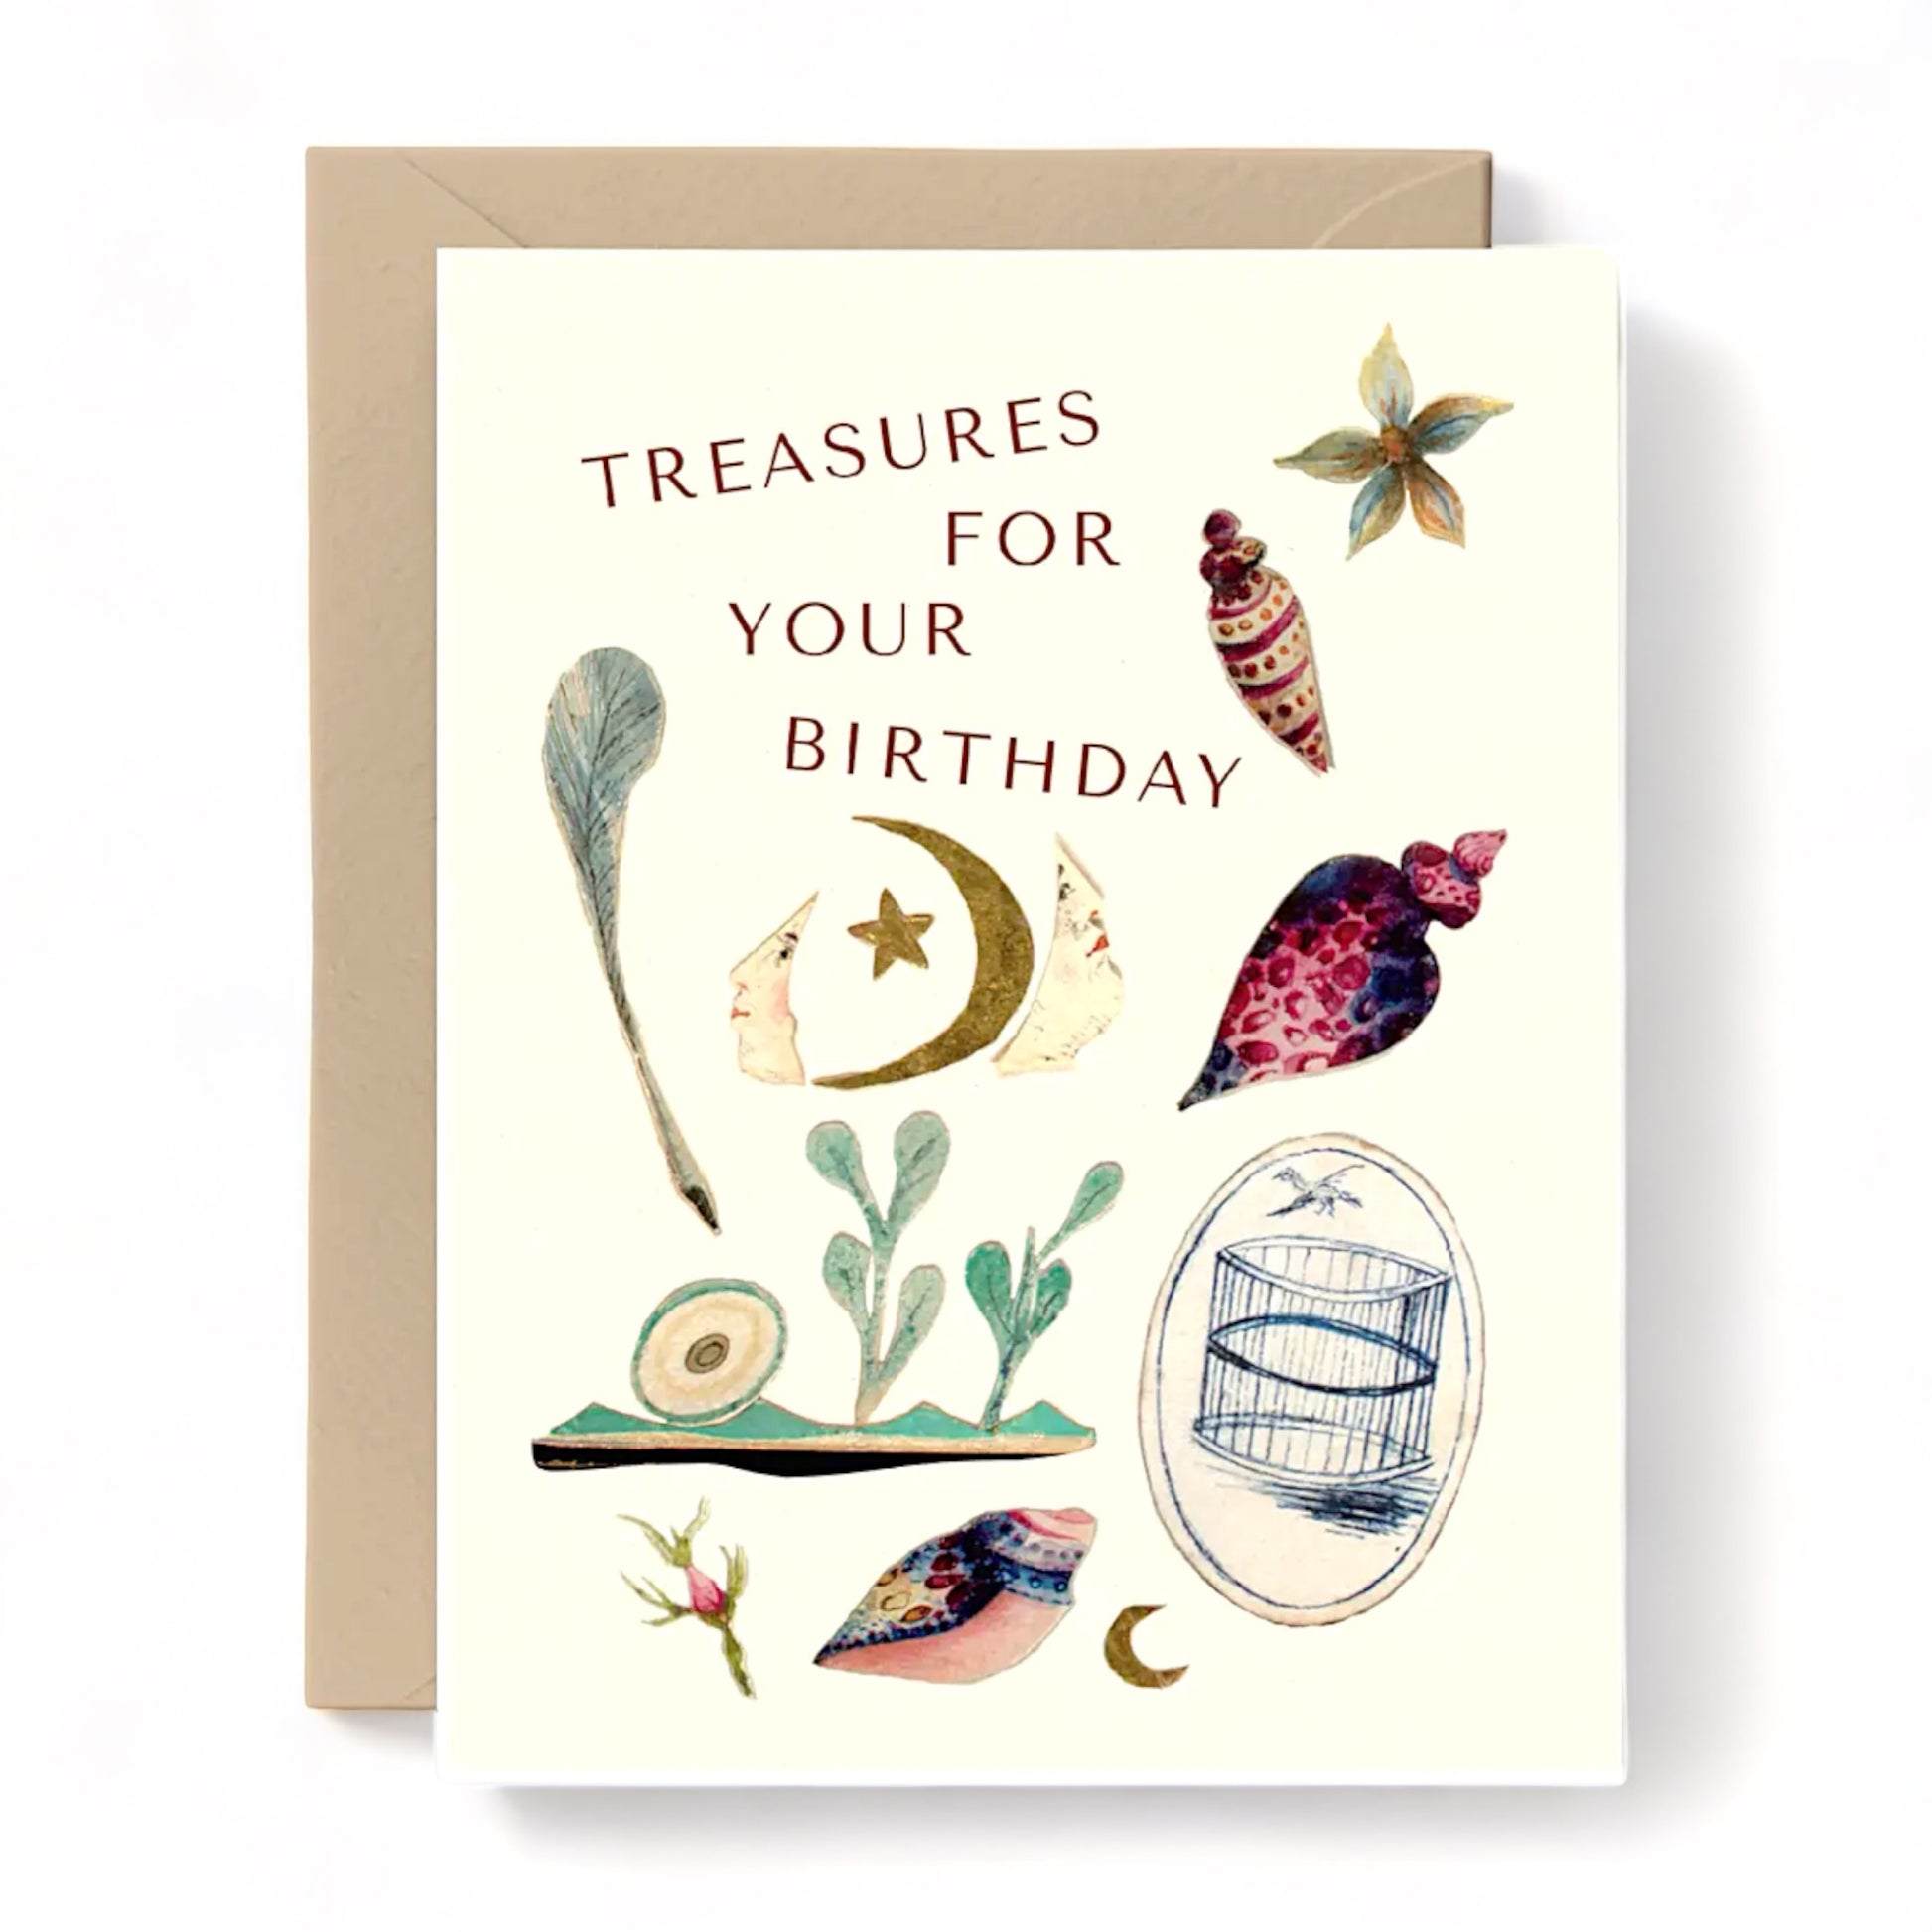 Treasures for Your Birthday - Greeting Card - Hella Kitsch